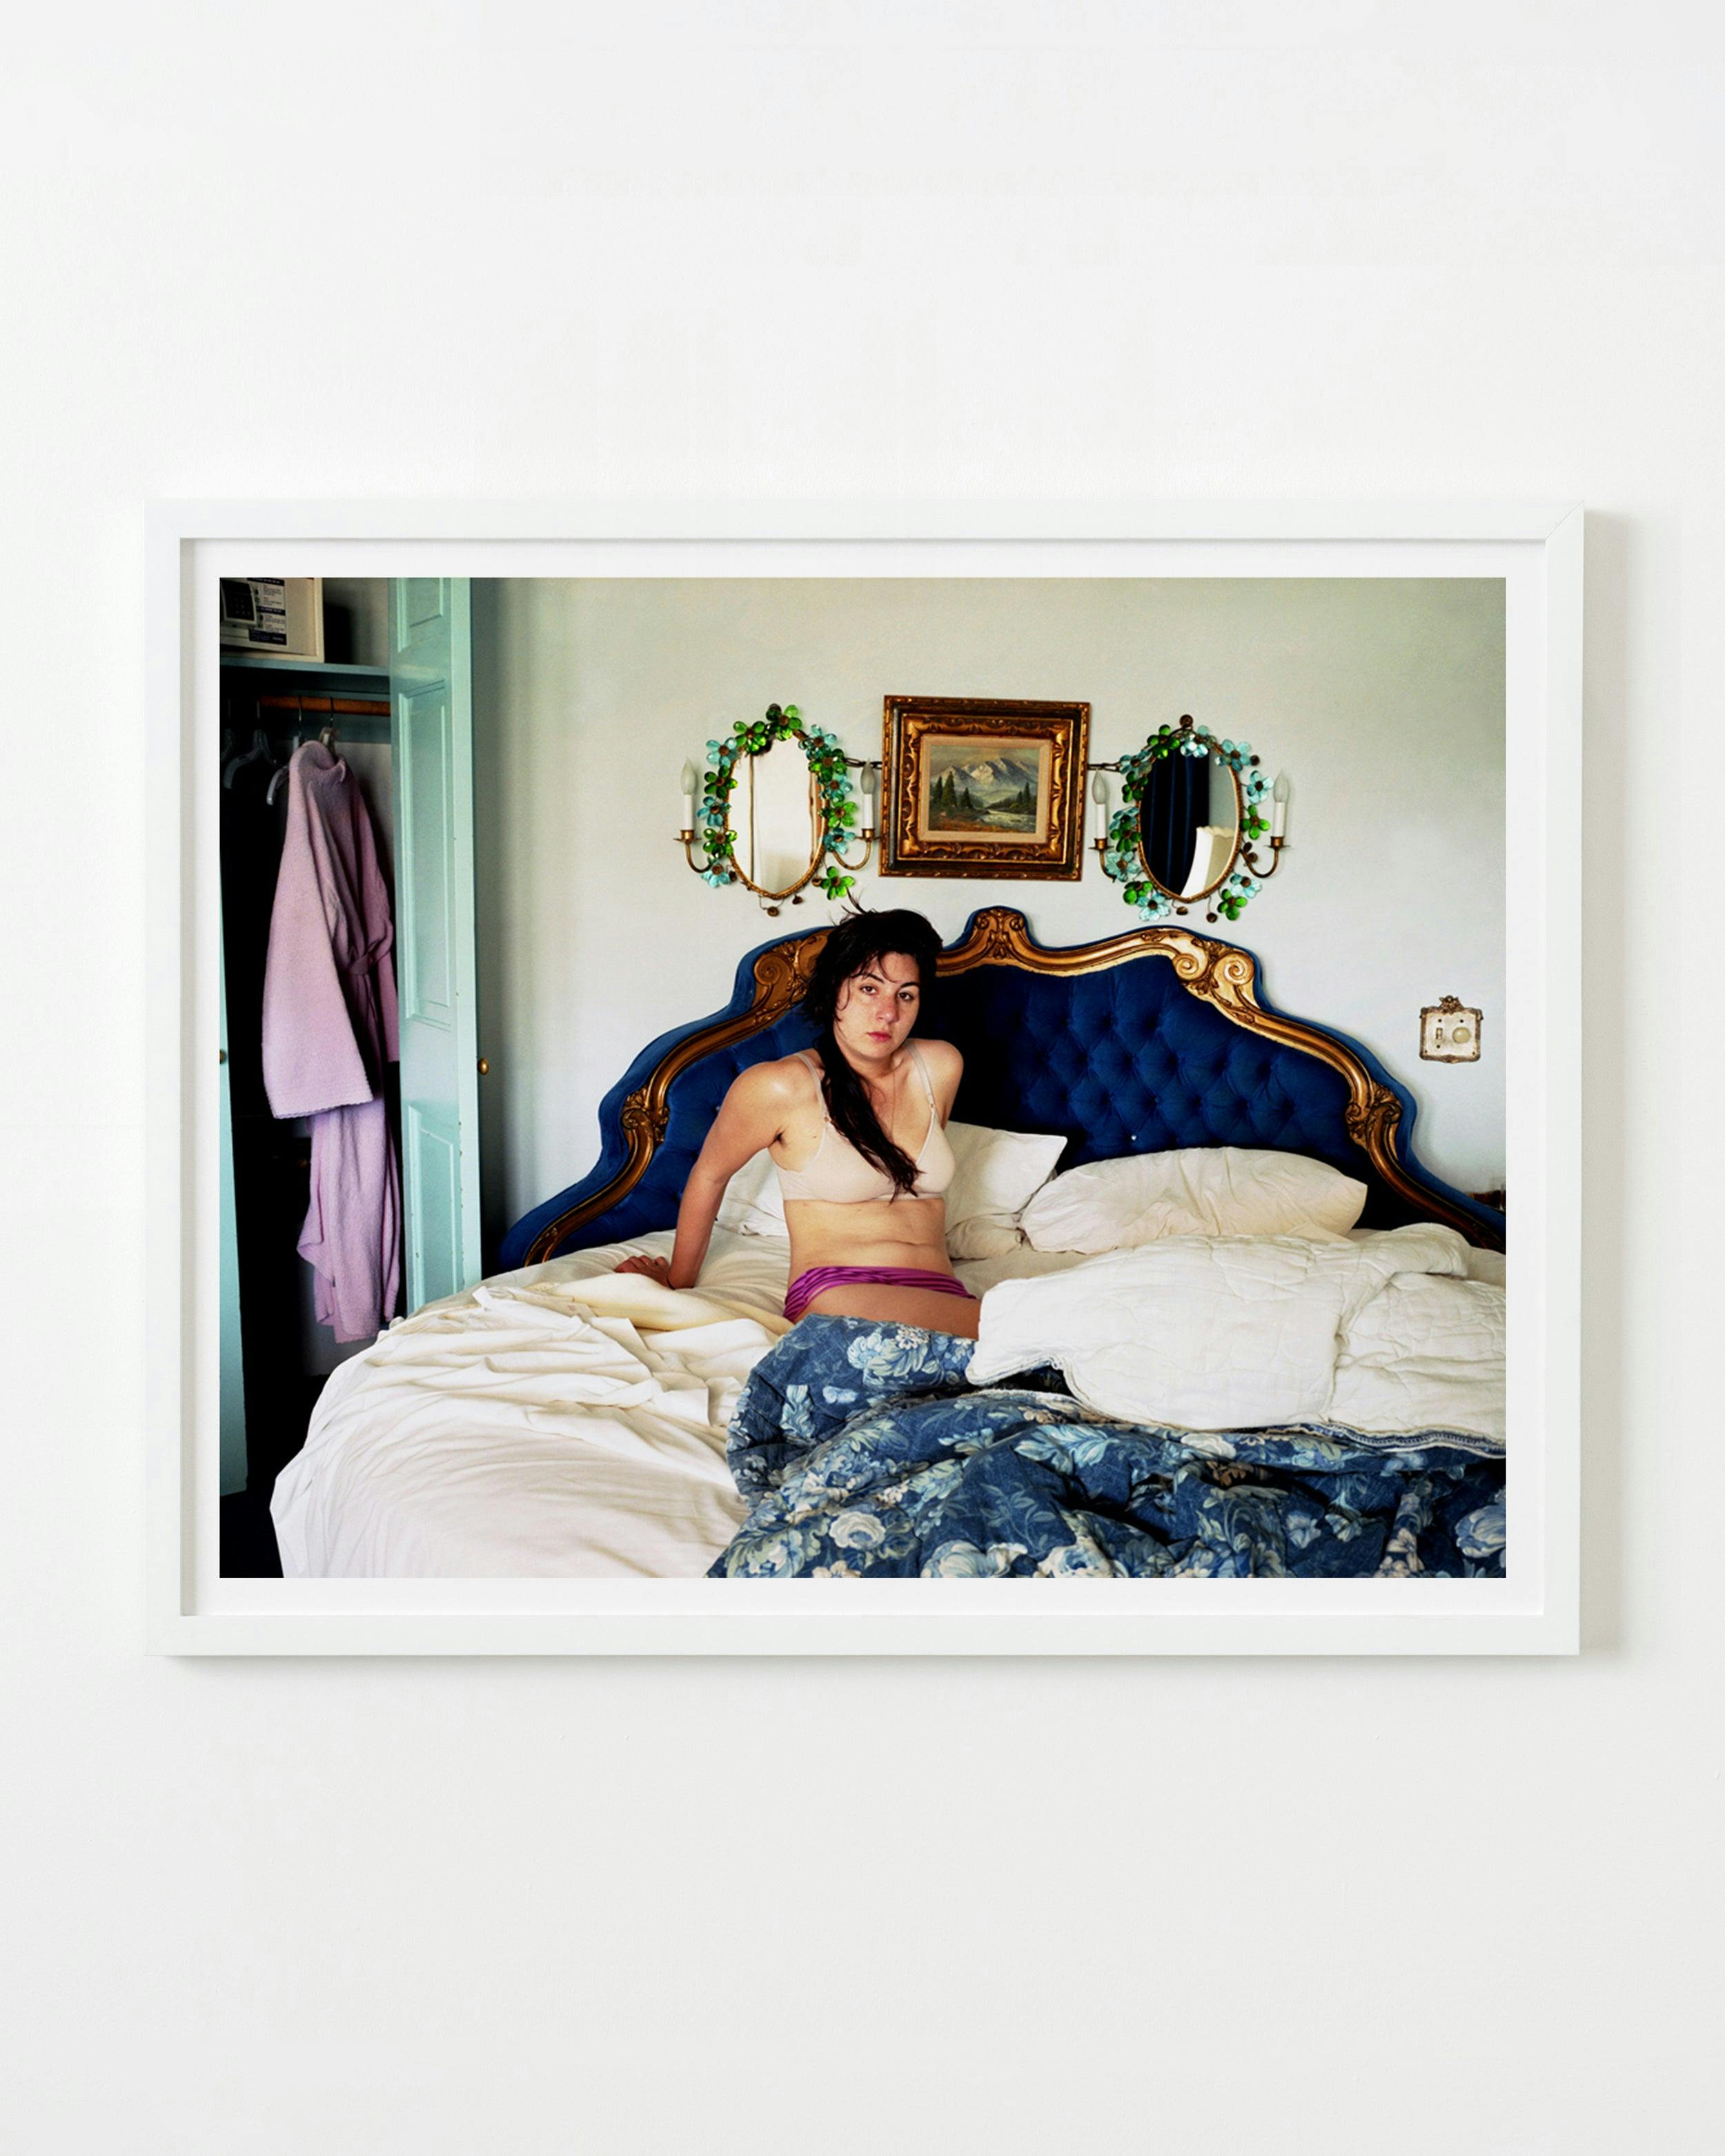 Photography by Nick Meyer titled "Alexis in a Round Bed, San Luis Obispo".